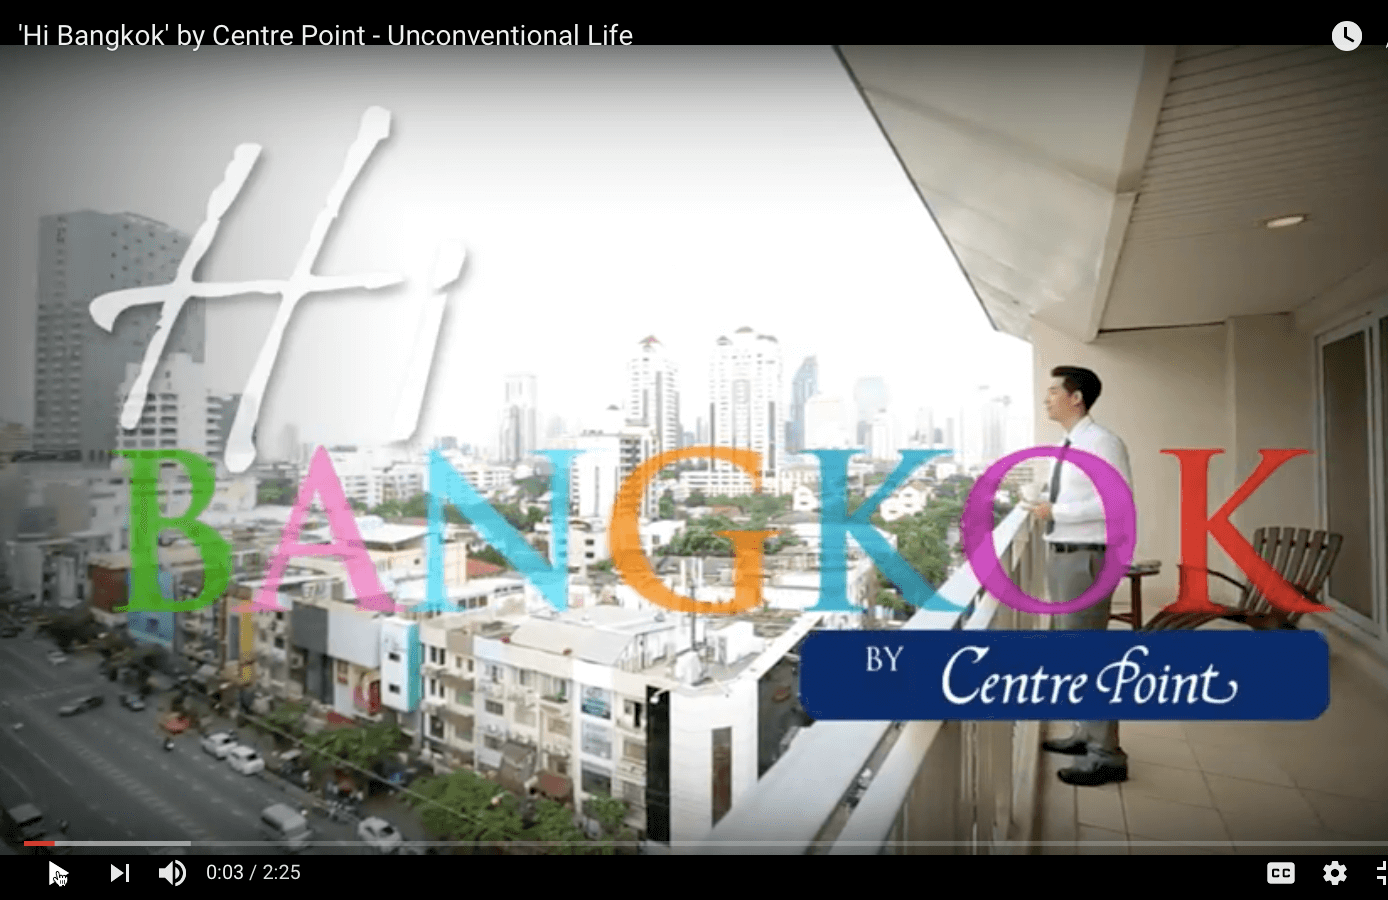 'Hi Bangkok' by Centre Point - Unconventional Life